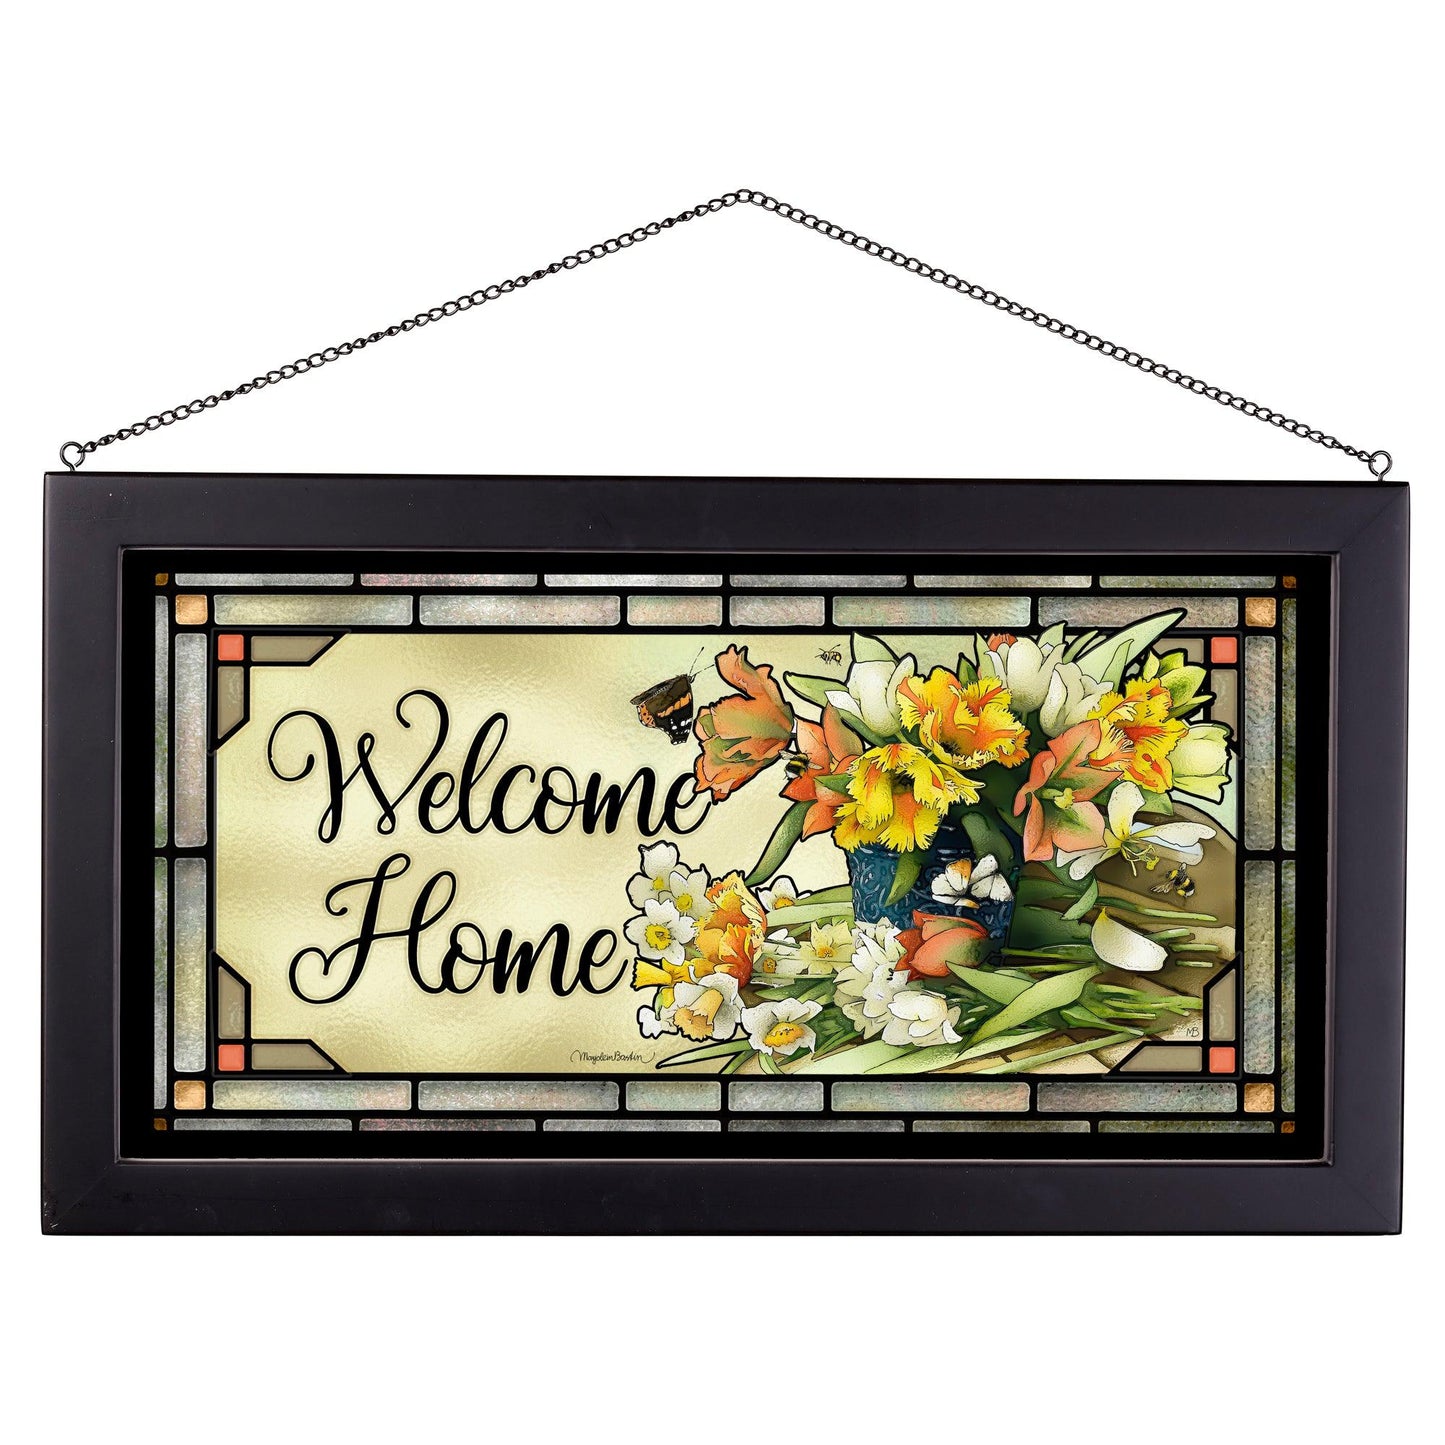 Welcome Home Stained Glass Art - Wild Wings